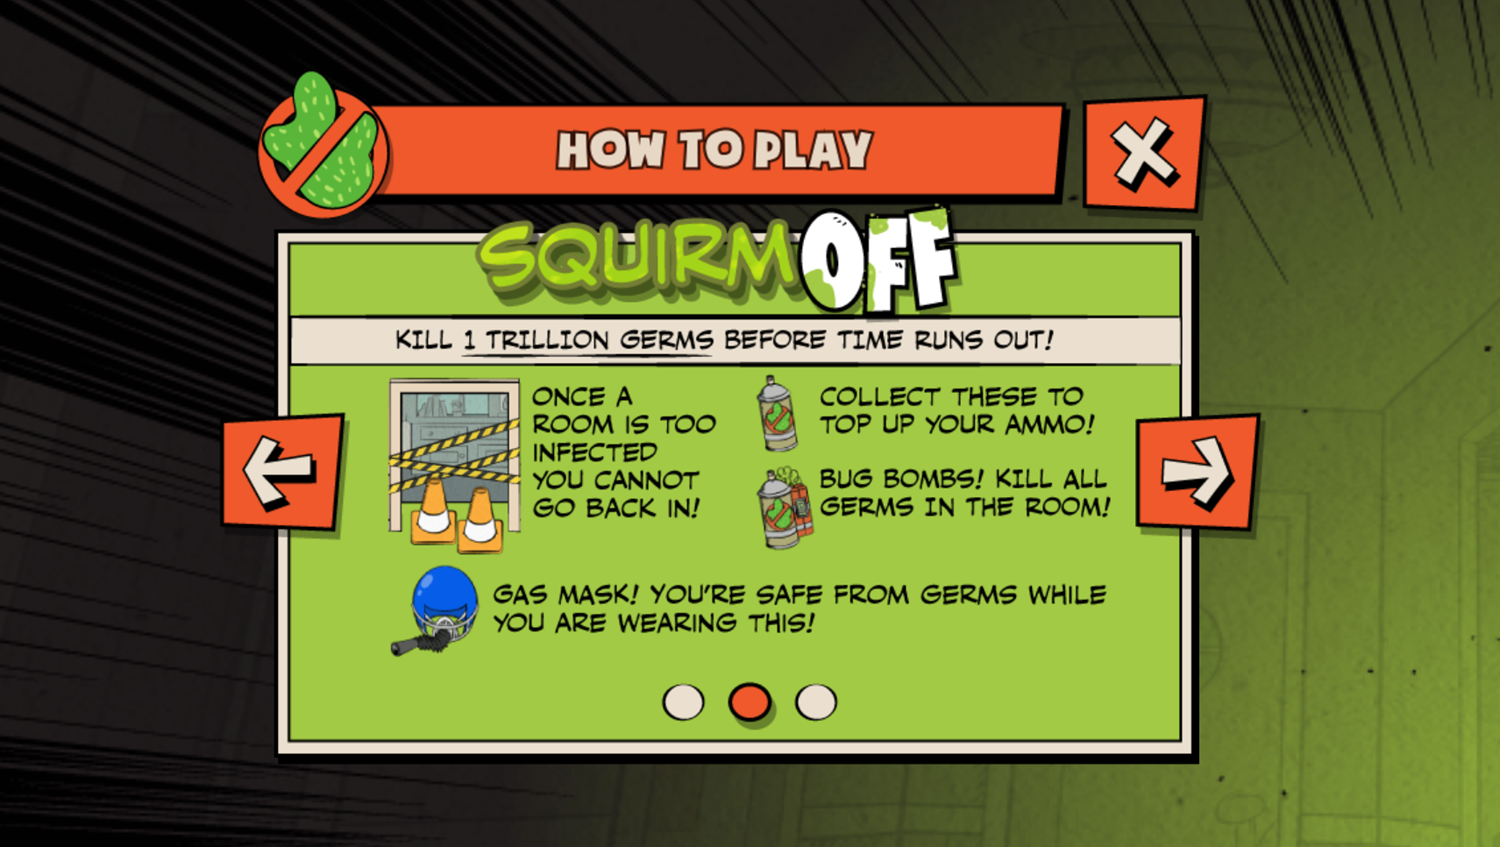 Loud House Germ Squirmish Game Squirm Off Instructions Screenshot.